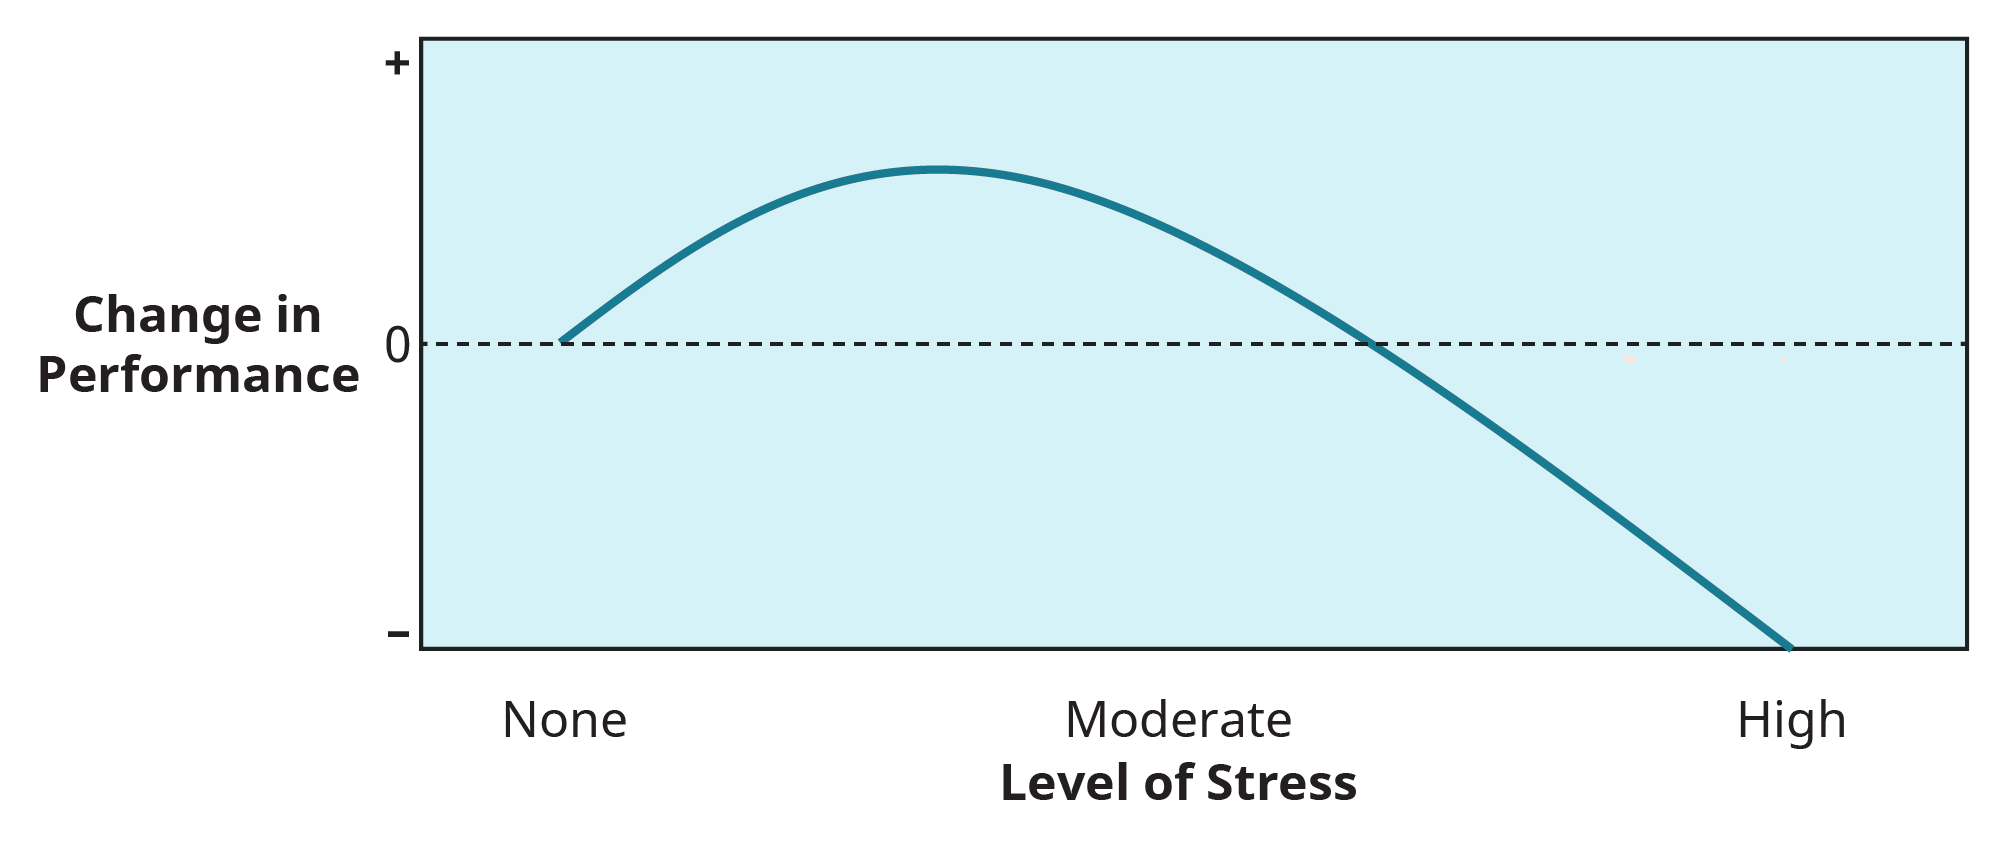 A graph depicts the relationship between stress and job performance